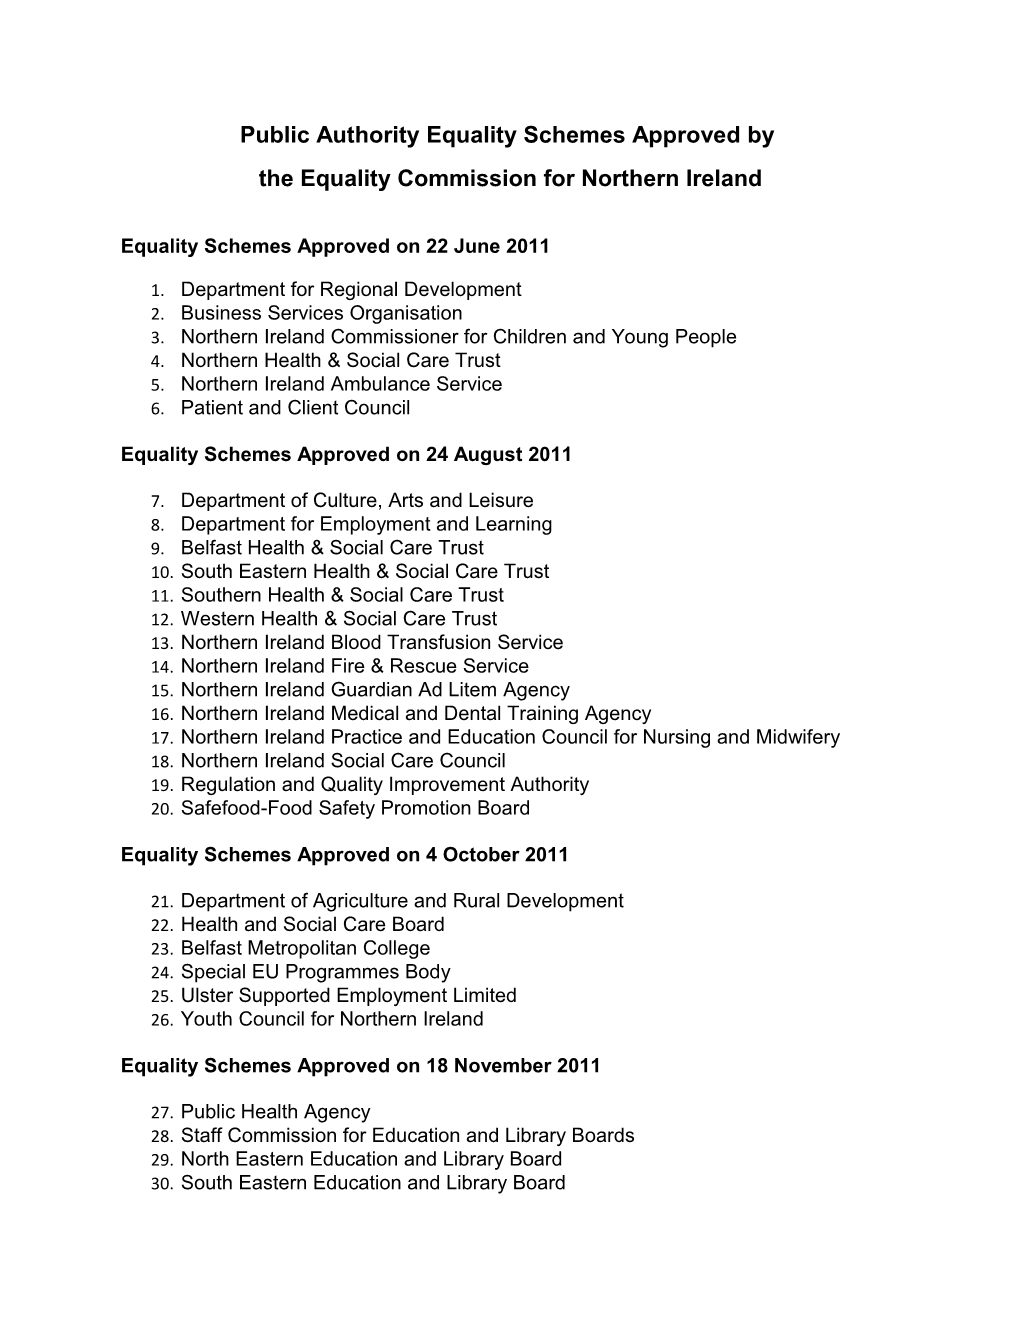 Public Authority Equality Schemes Approved By